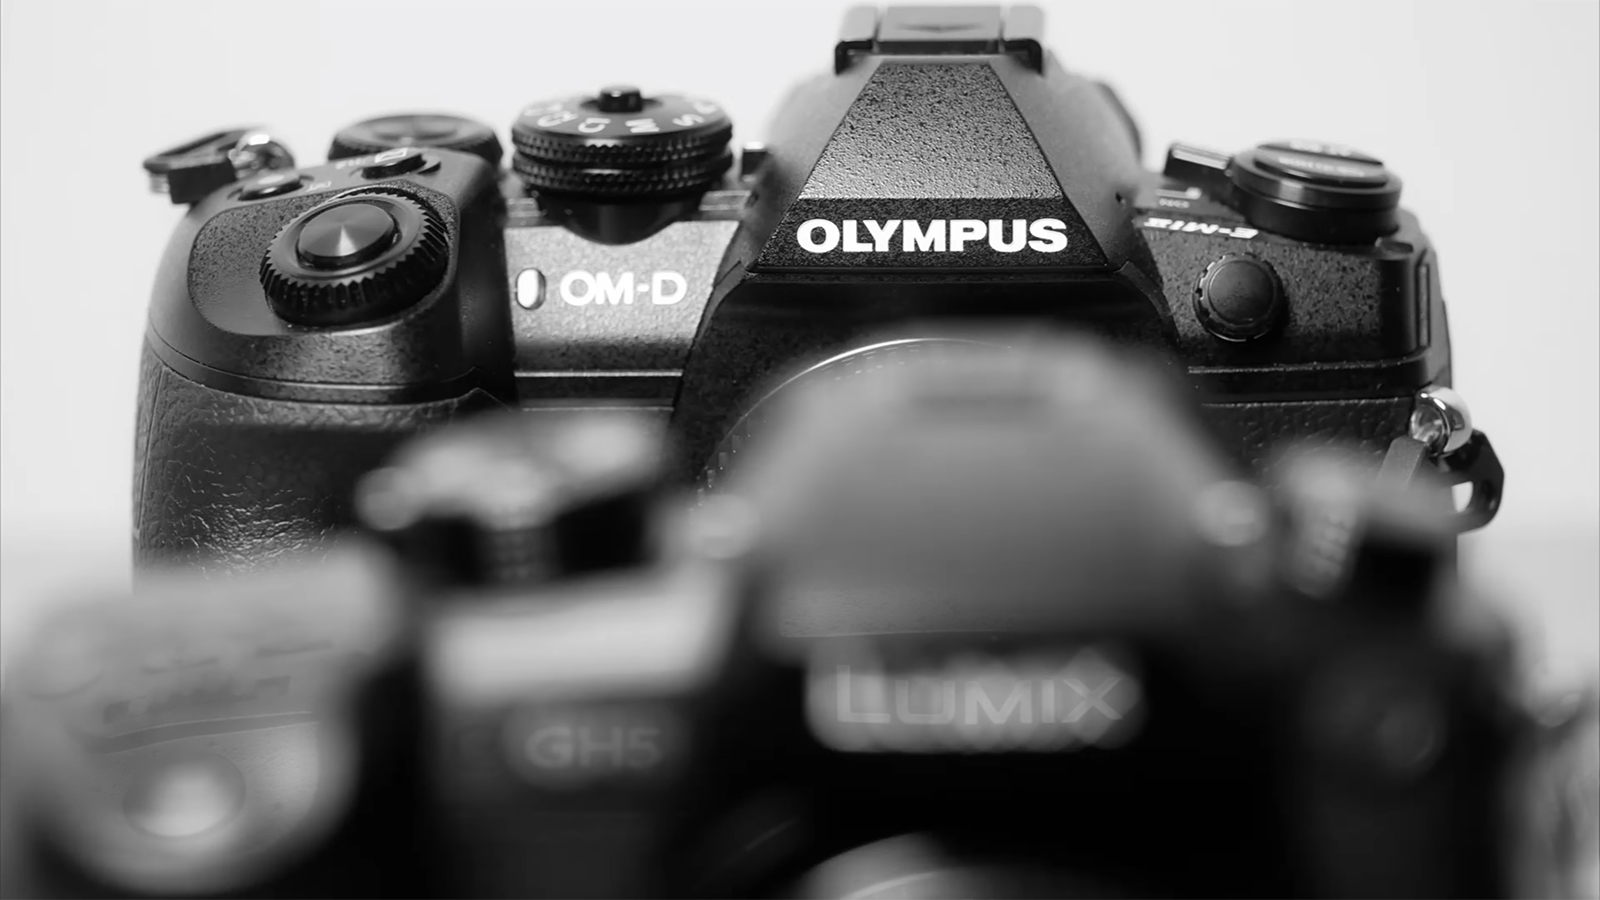 The Olympus E-M1 Mkll compared to the Panasonic GH5